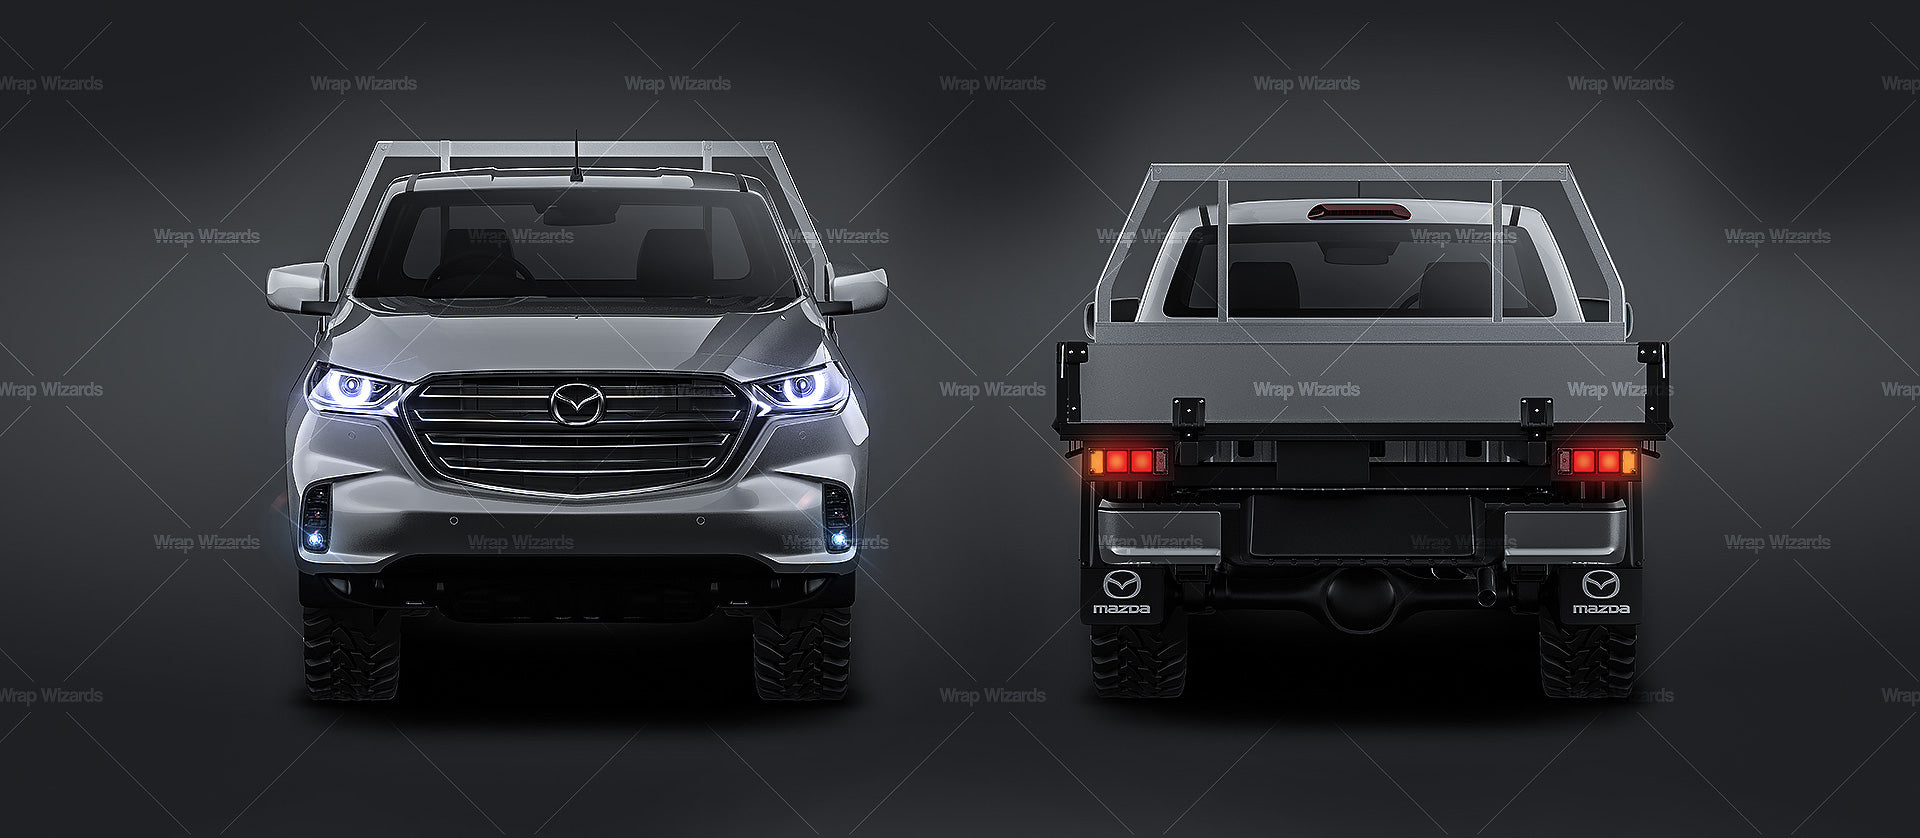 Mazda BT-50 Single cab with alloy tray - Truck/Pick-up Mockup